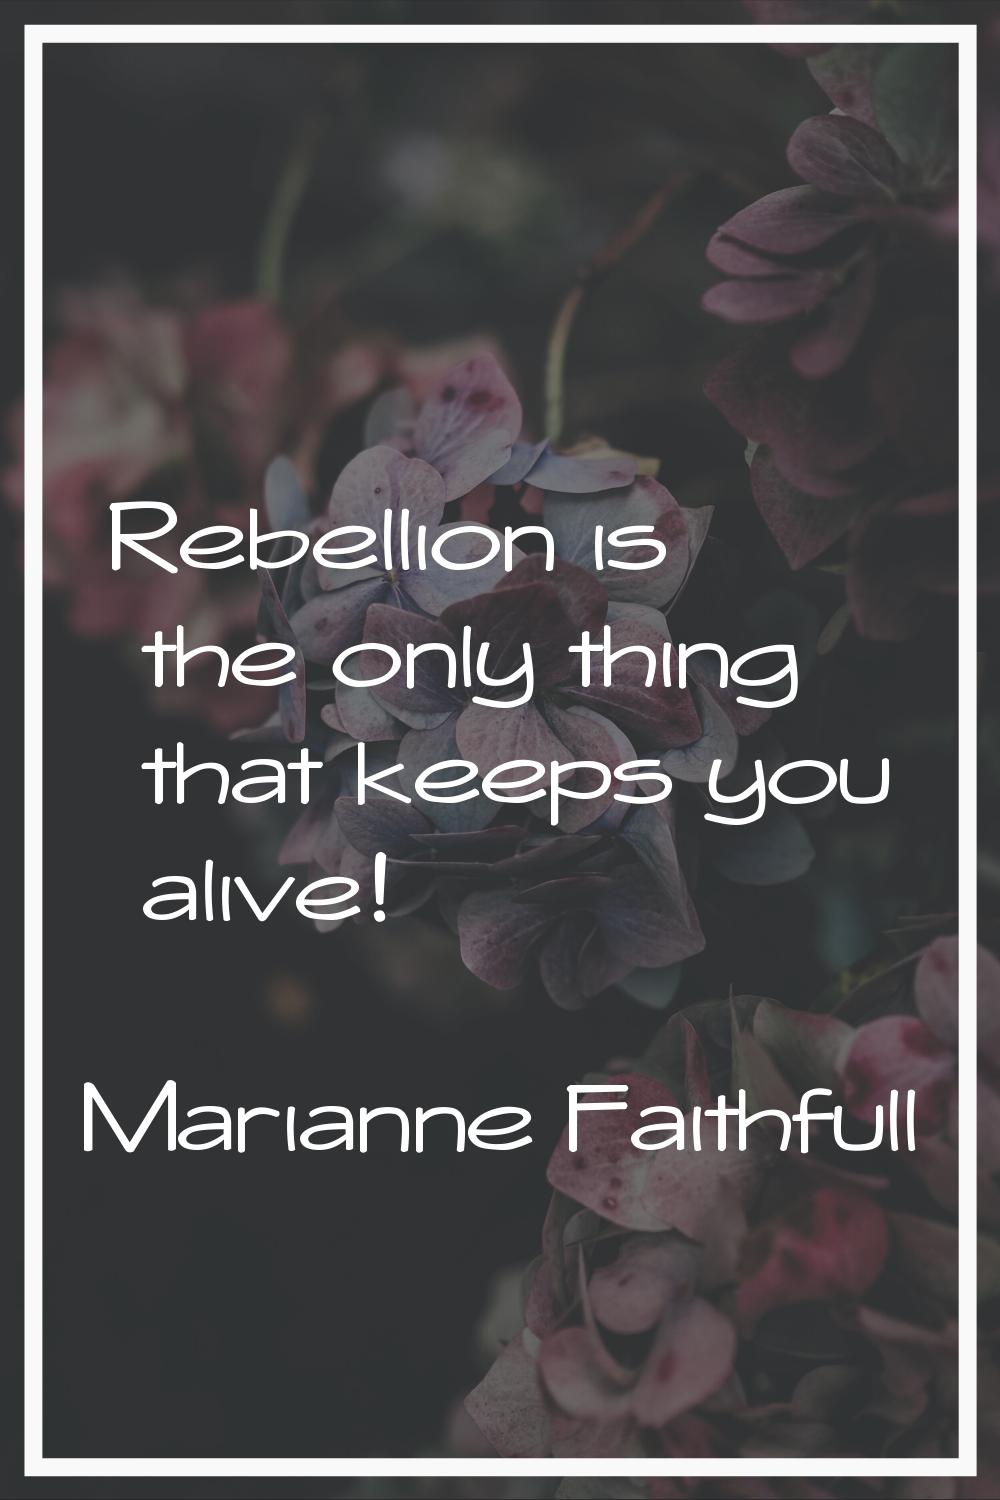 Rebellion is the only thing that keeps you alive!